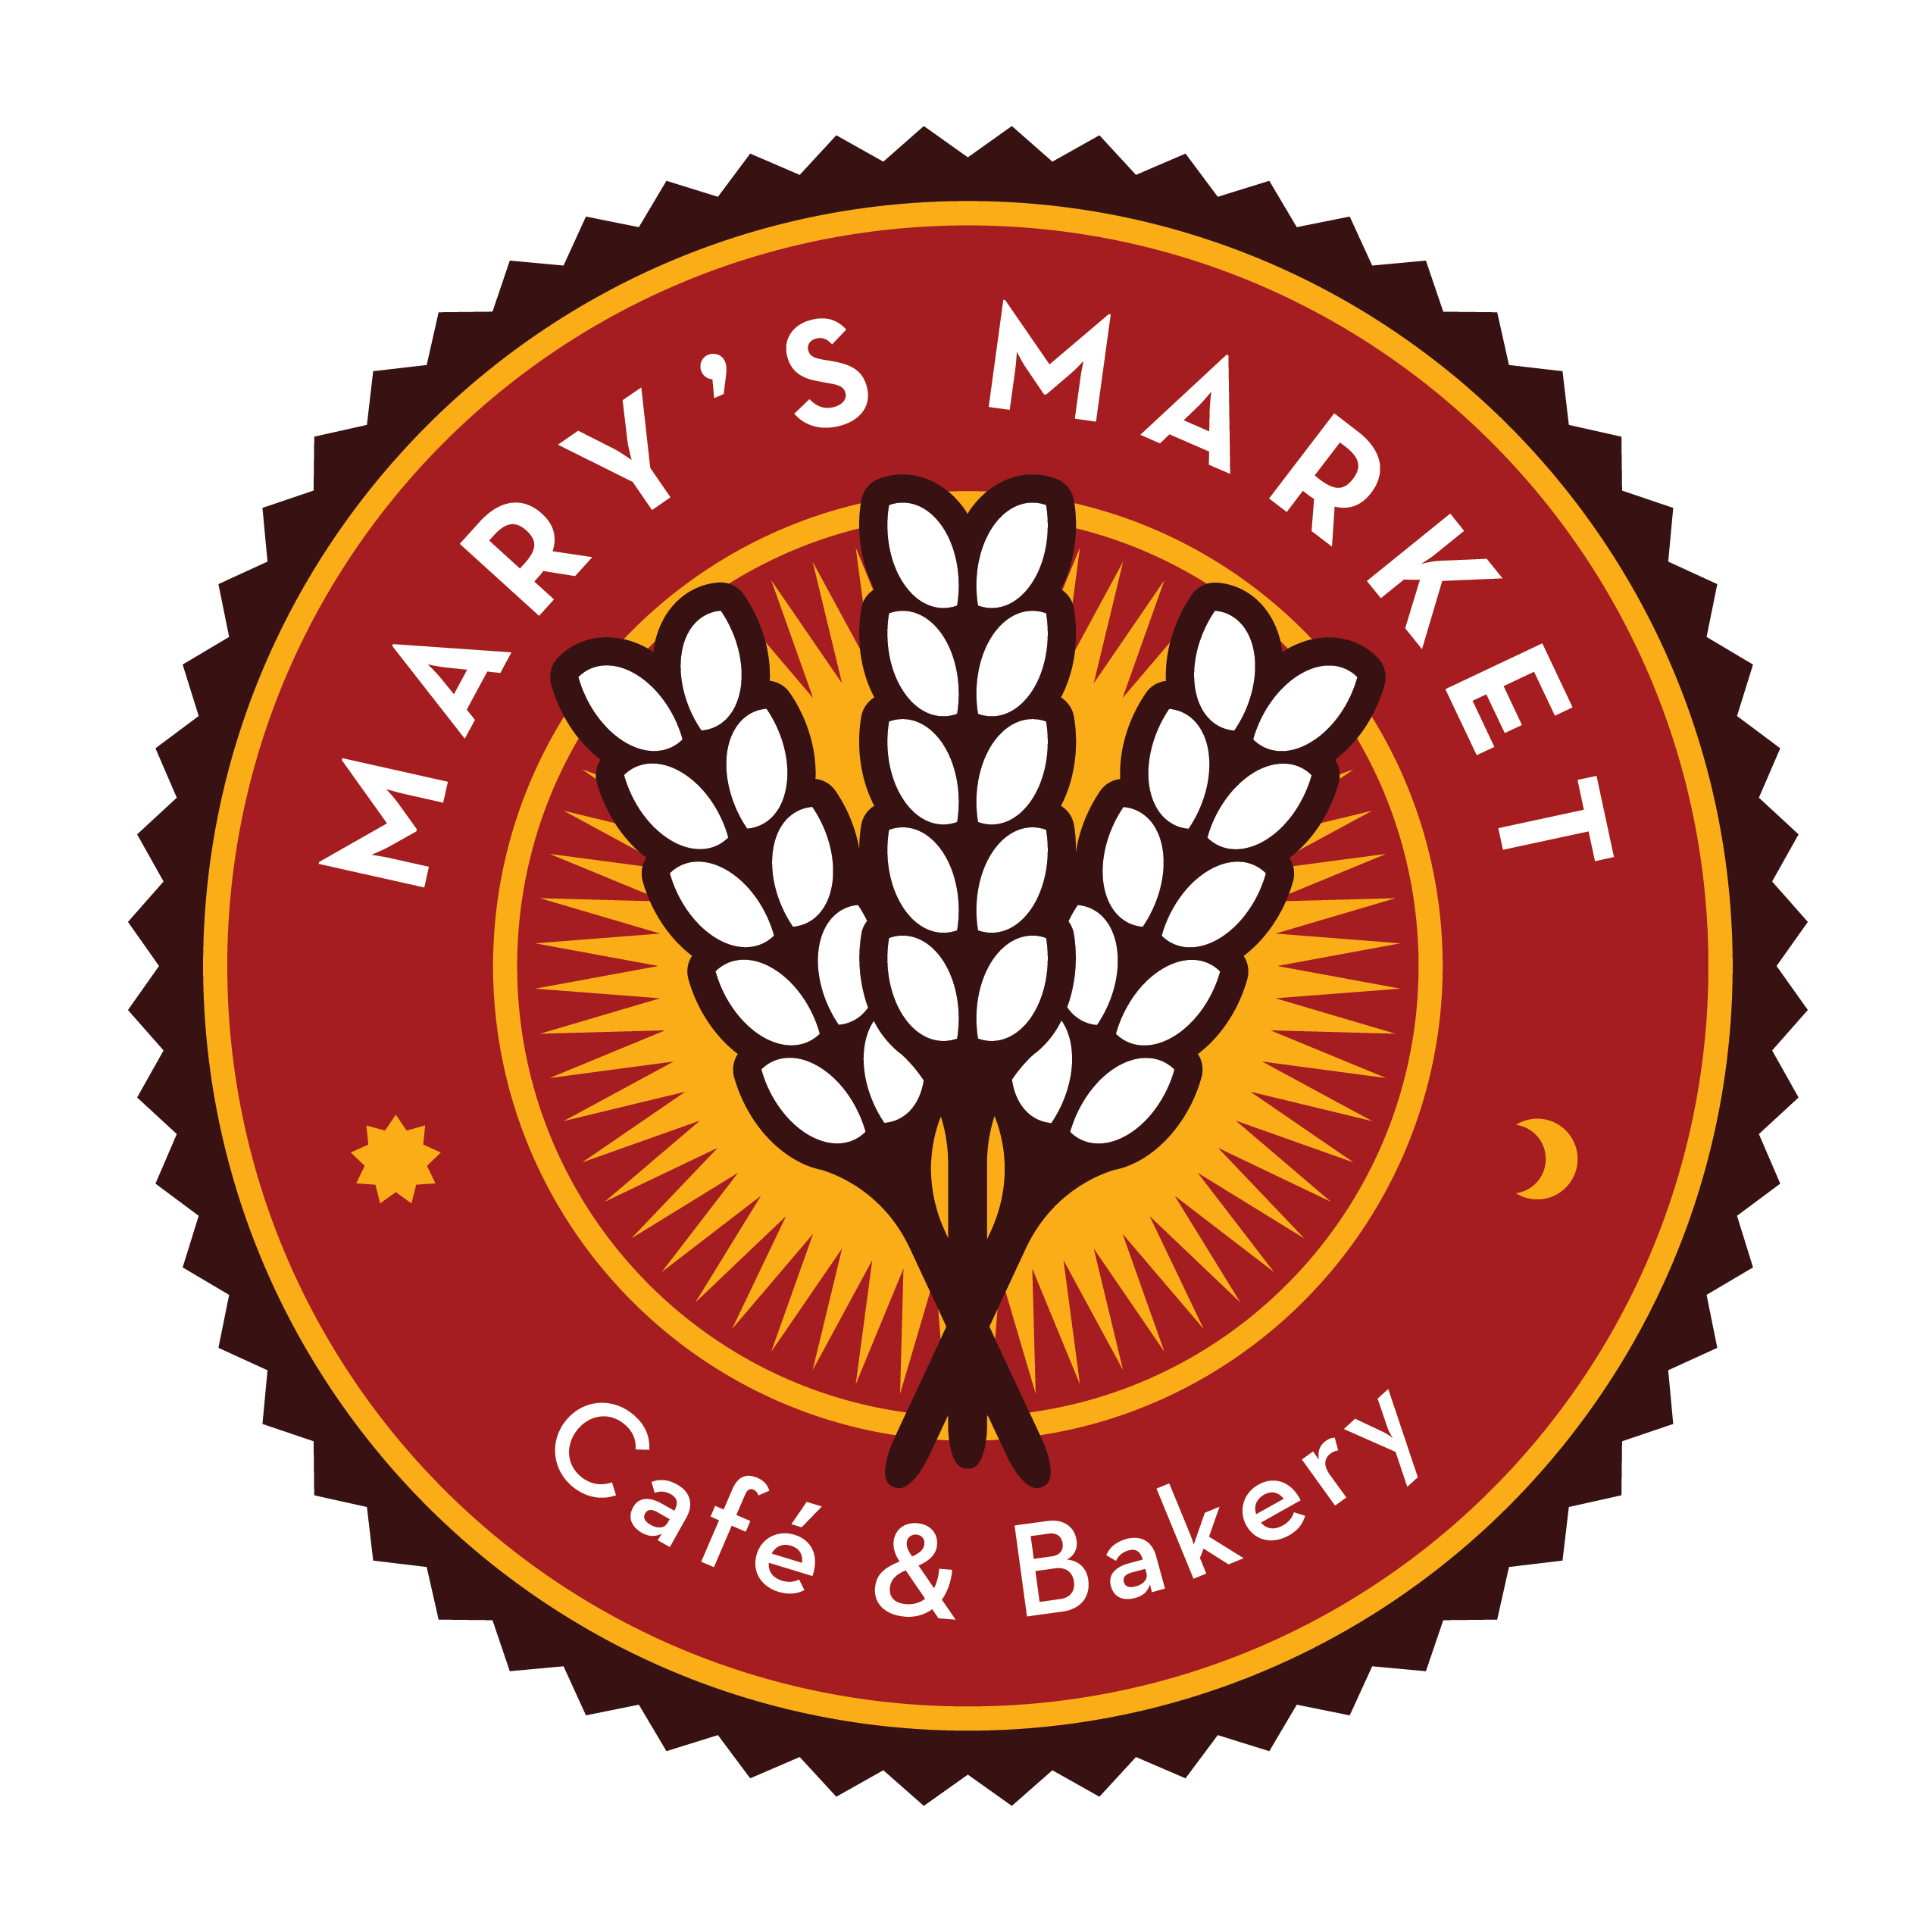 Made From Scratch – Mary's Market – Cafe & Bakery